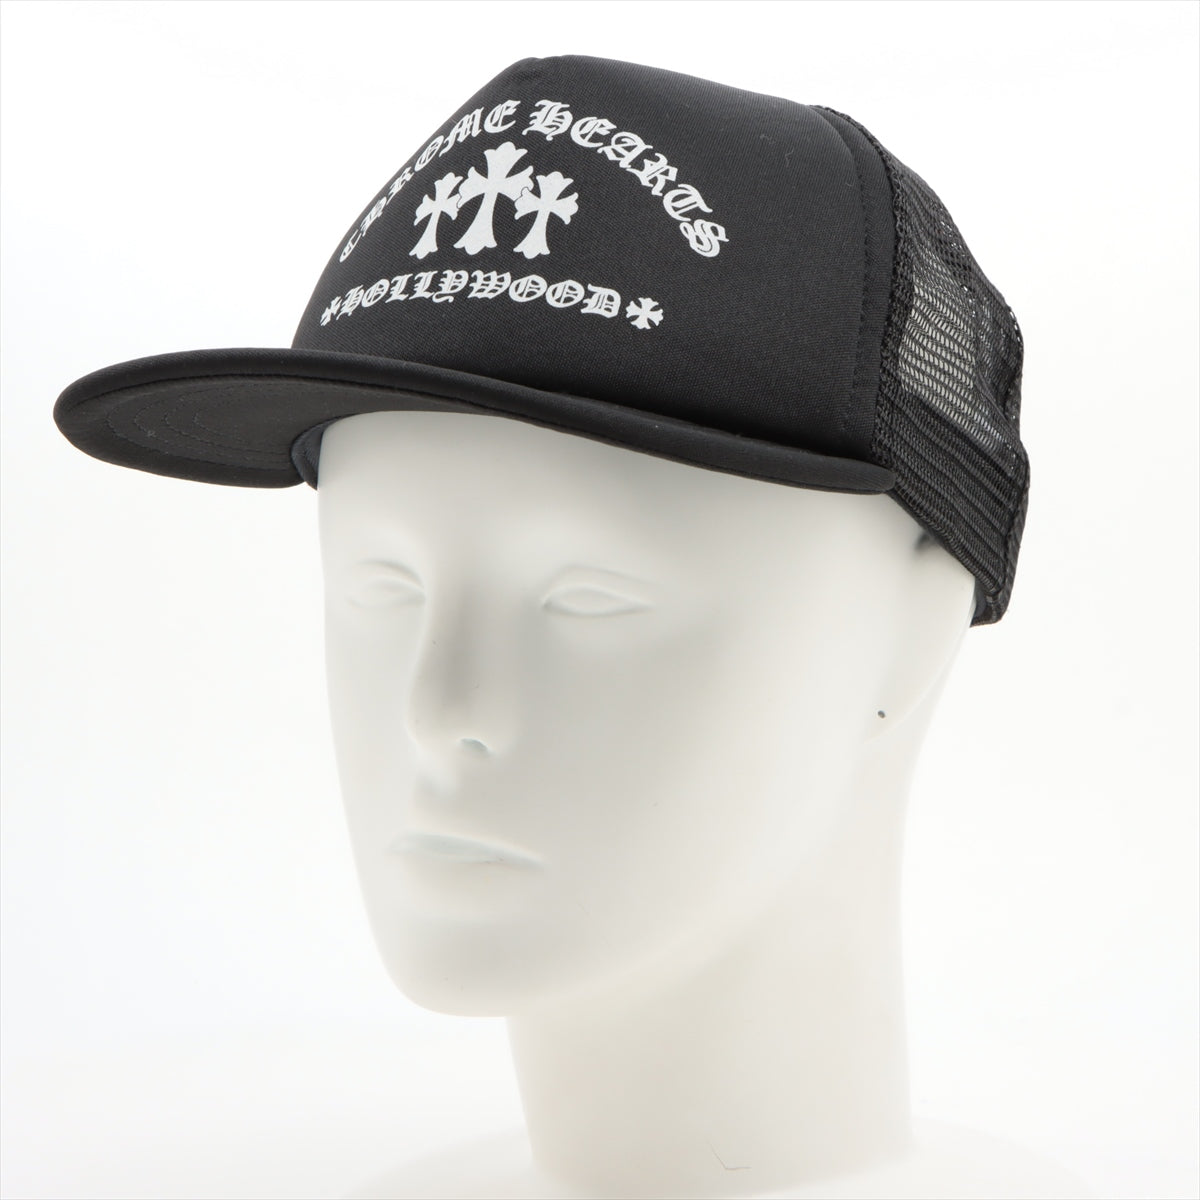 Chrome Hearts Trucker Cap Polyester ONE SIZE 53-60 King octopus